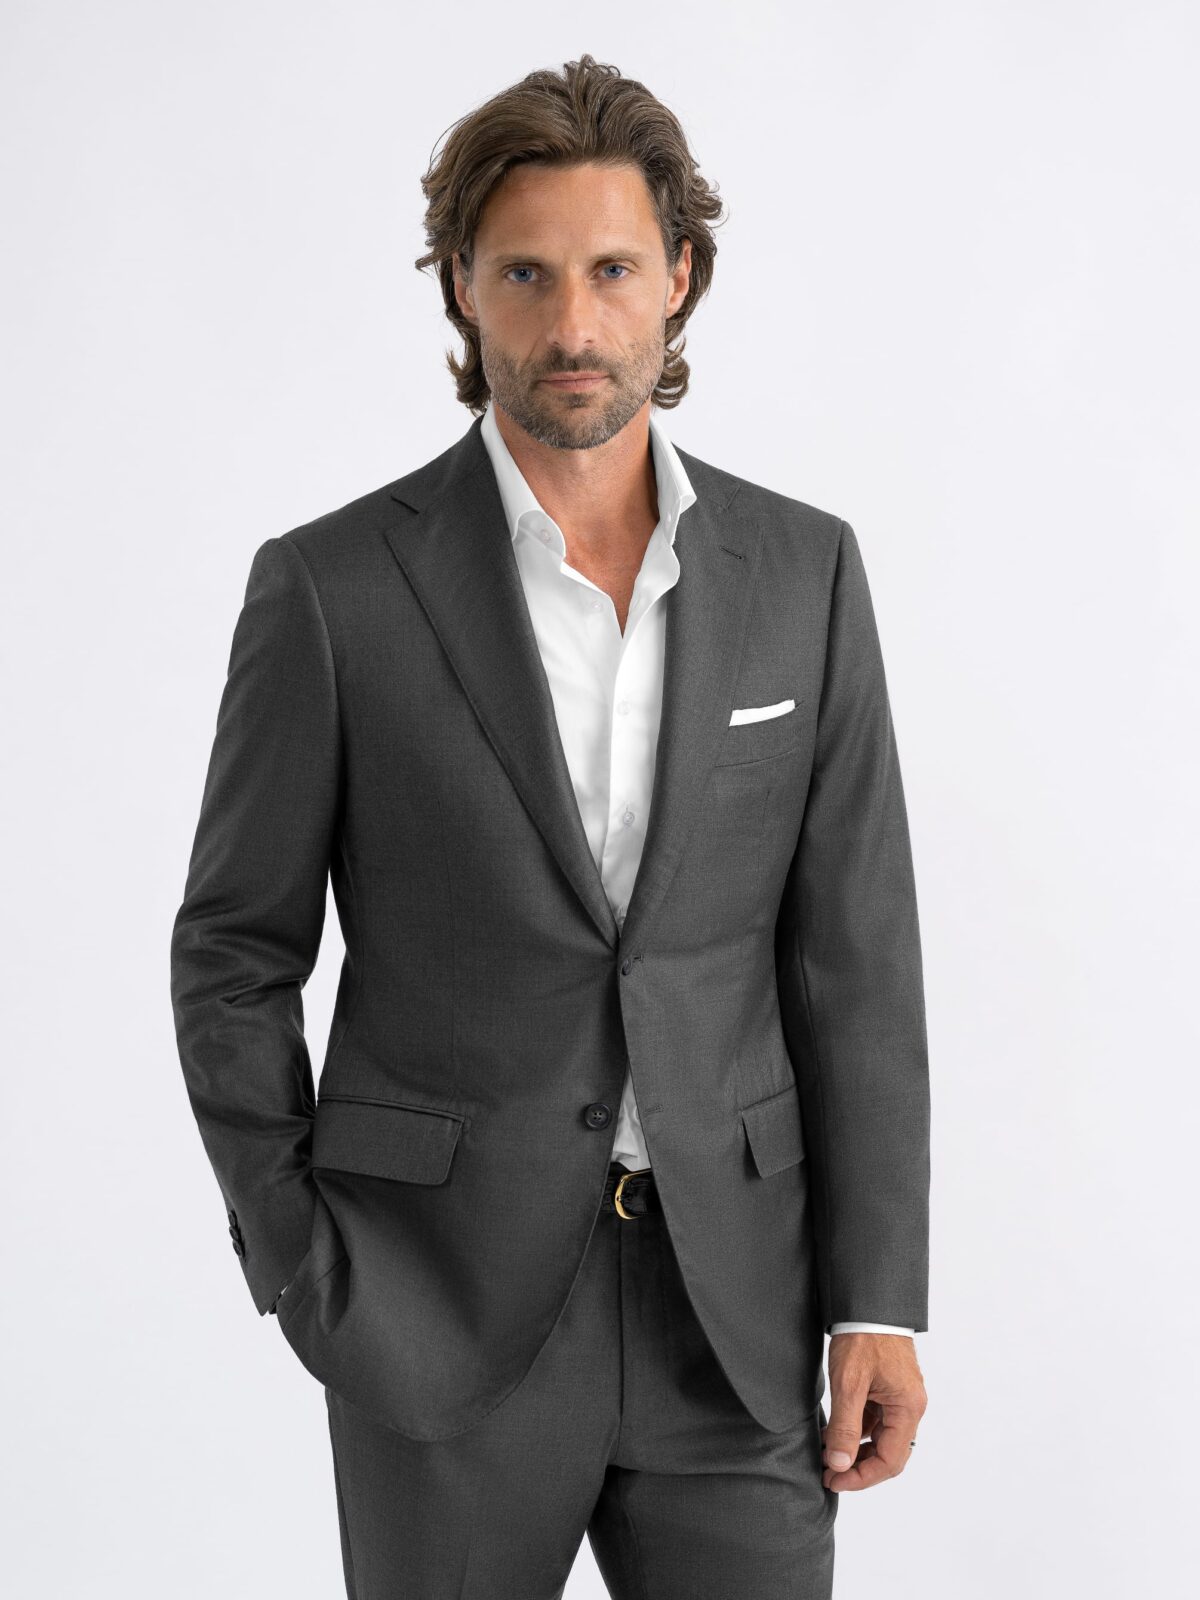 Grey pure wool suit with a pocket square and fabric by Loro Piana